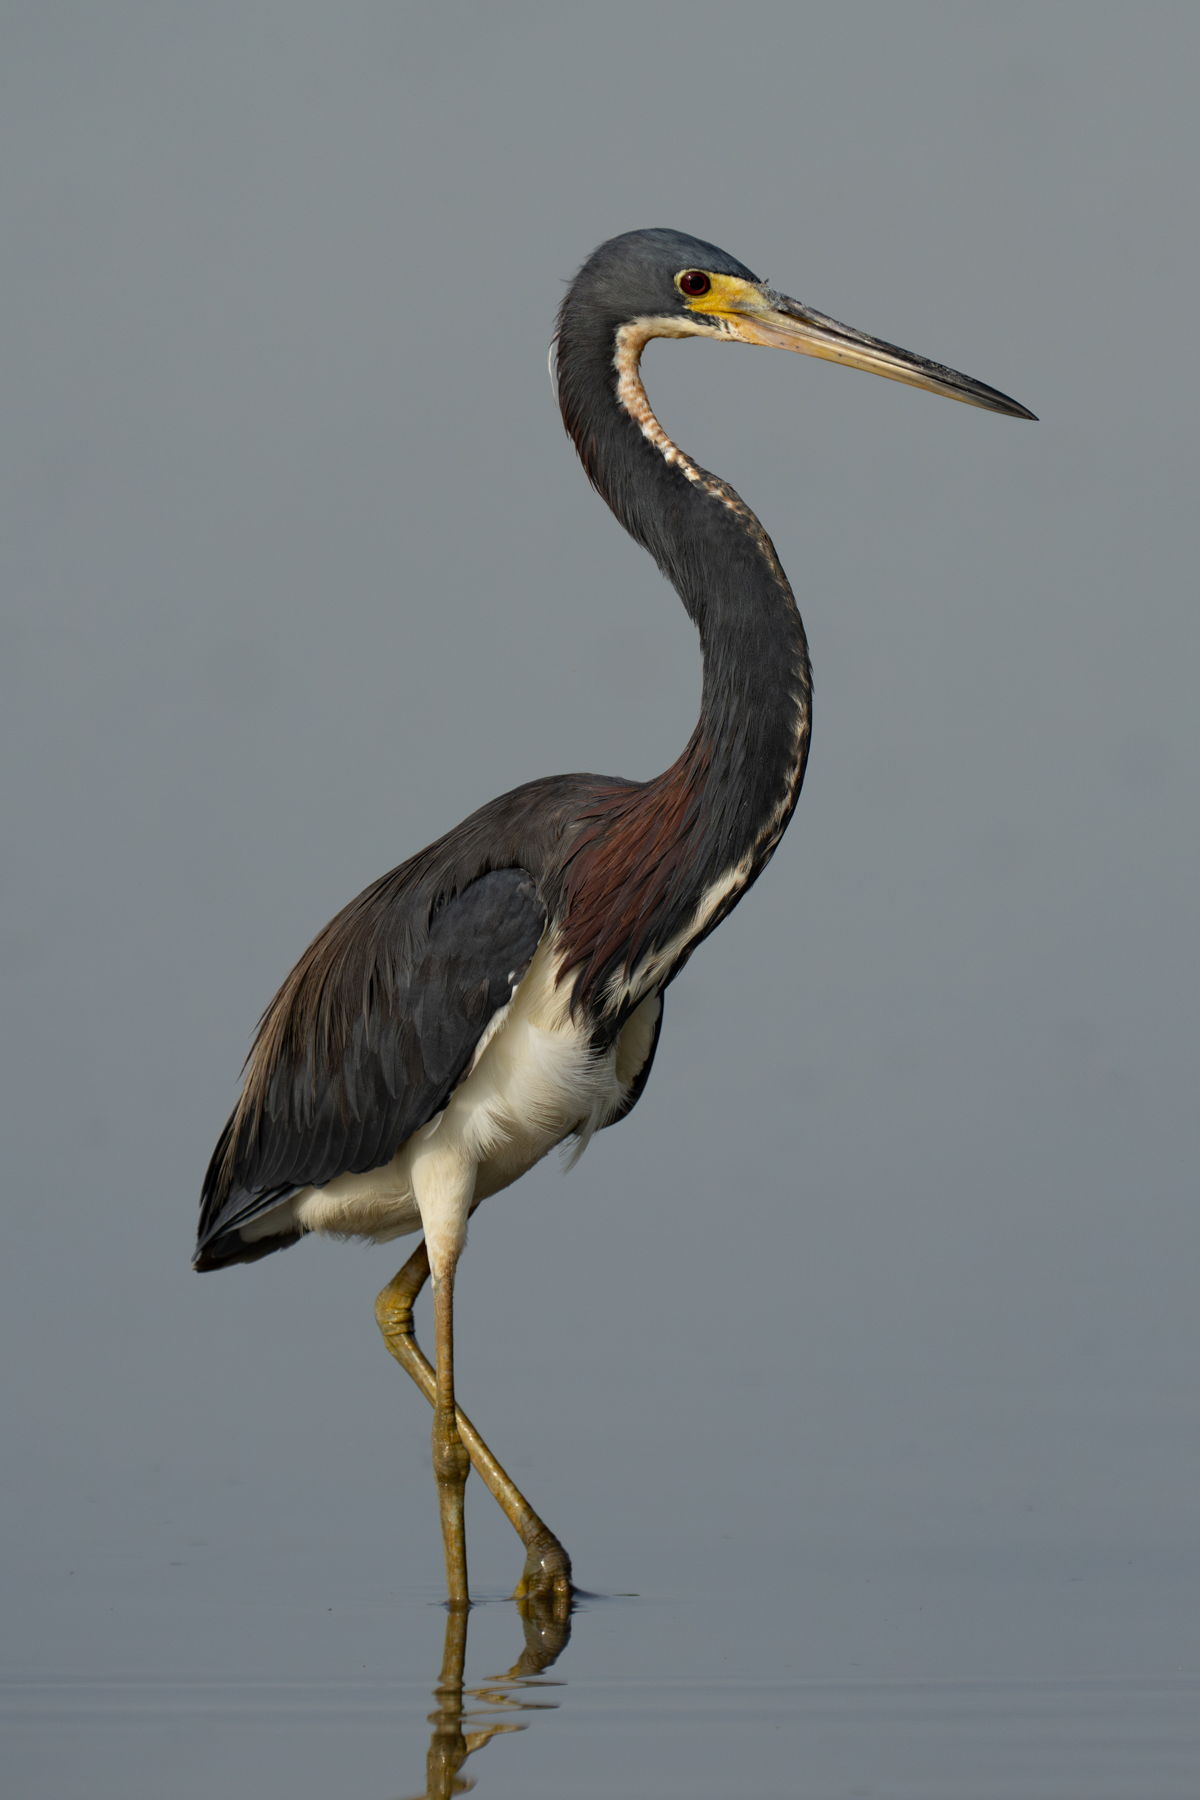 Tri-coloured Heron in Cano Negro National Park near the border of Costa Rica and Nicaragua (image by Inger Vandyke)